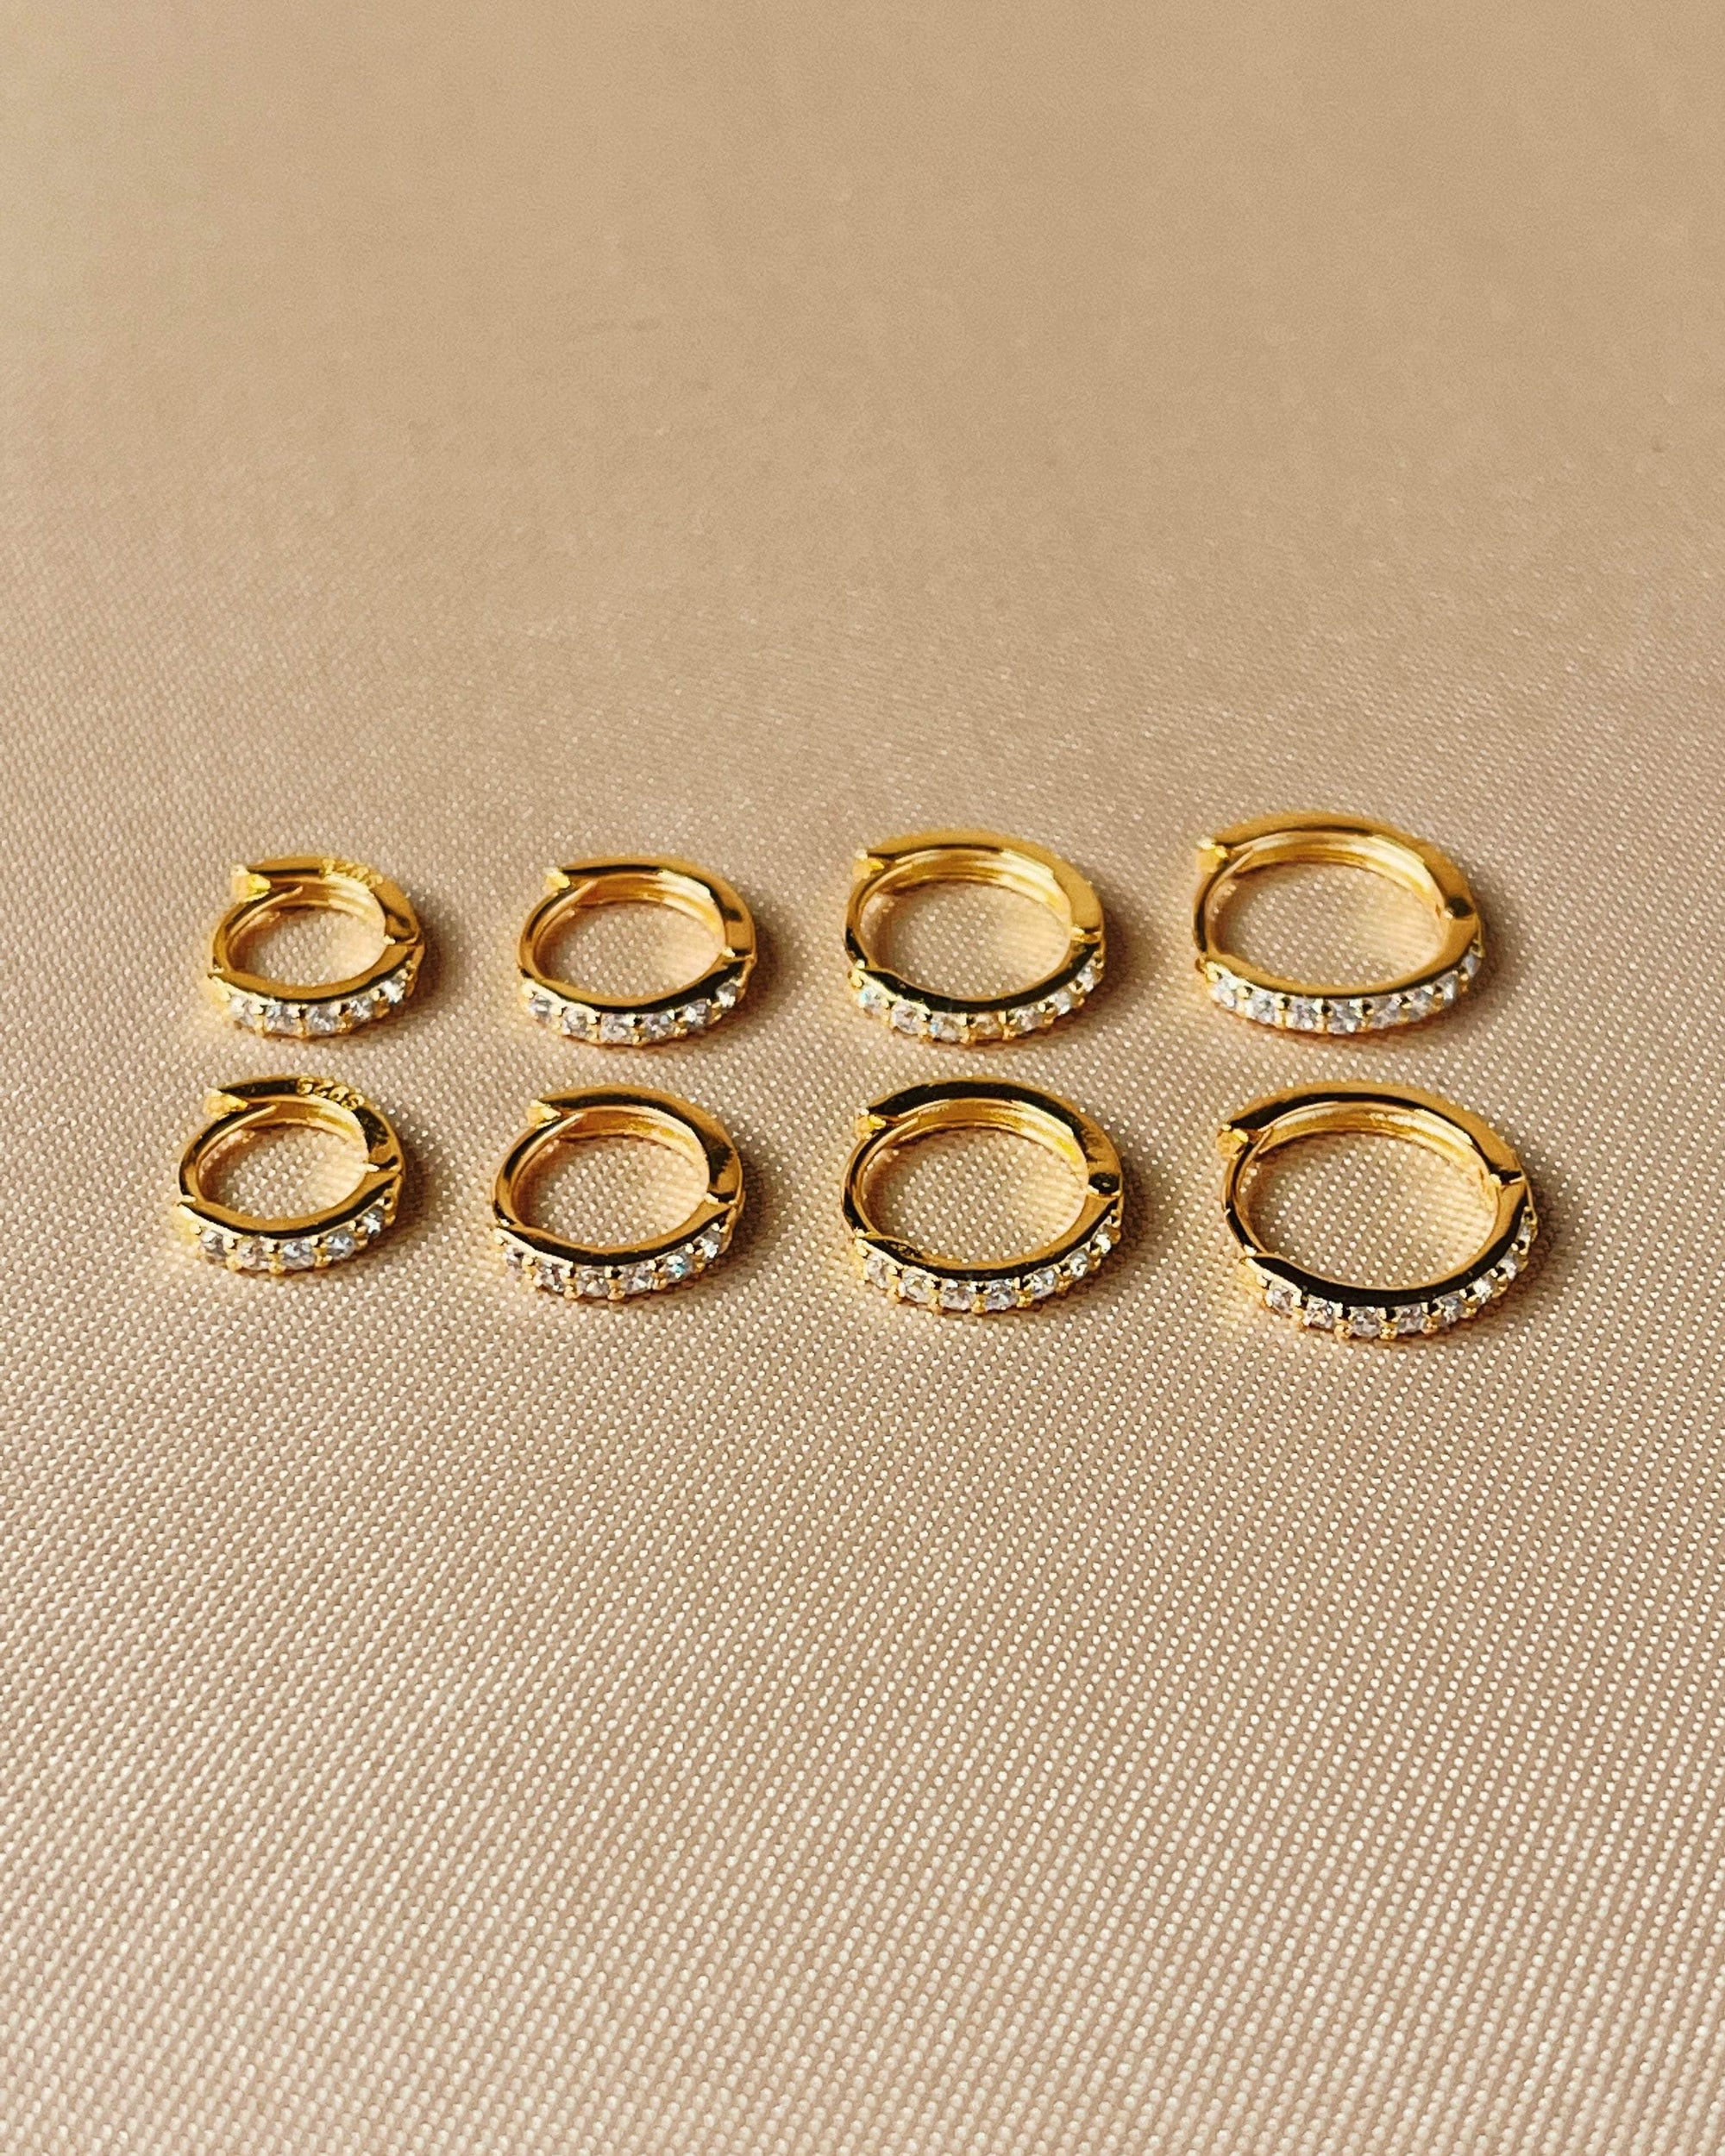 So Dainty Co. Huggies / Hoops Kathryn Gold Pave Huggies (Choose 1 — 5mm / 6mm / 7mm / 8mm / 9mm) Gold Plated 925 Sterling Silver Jewelry